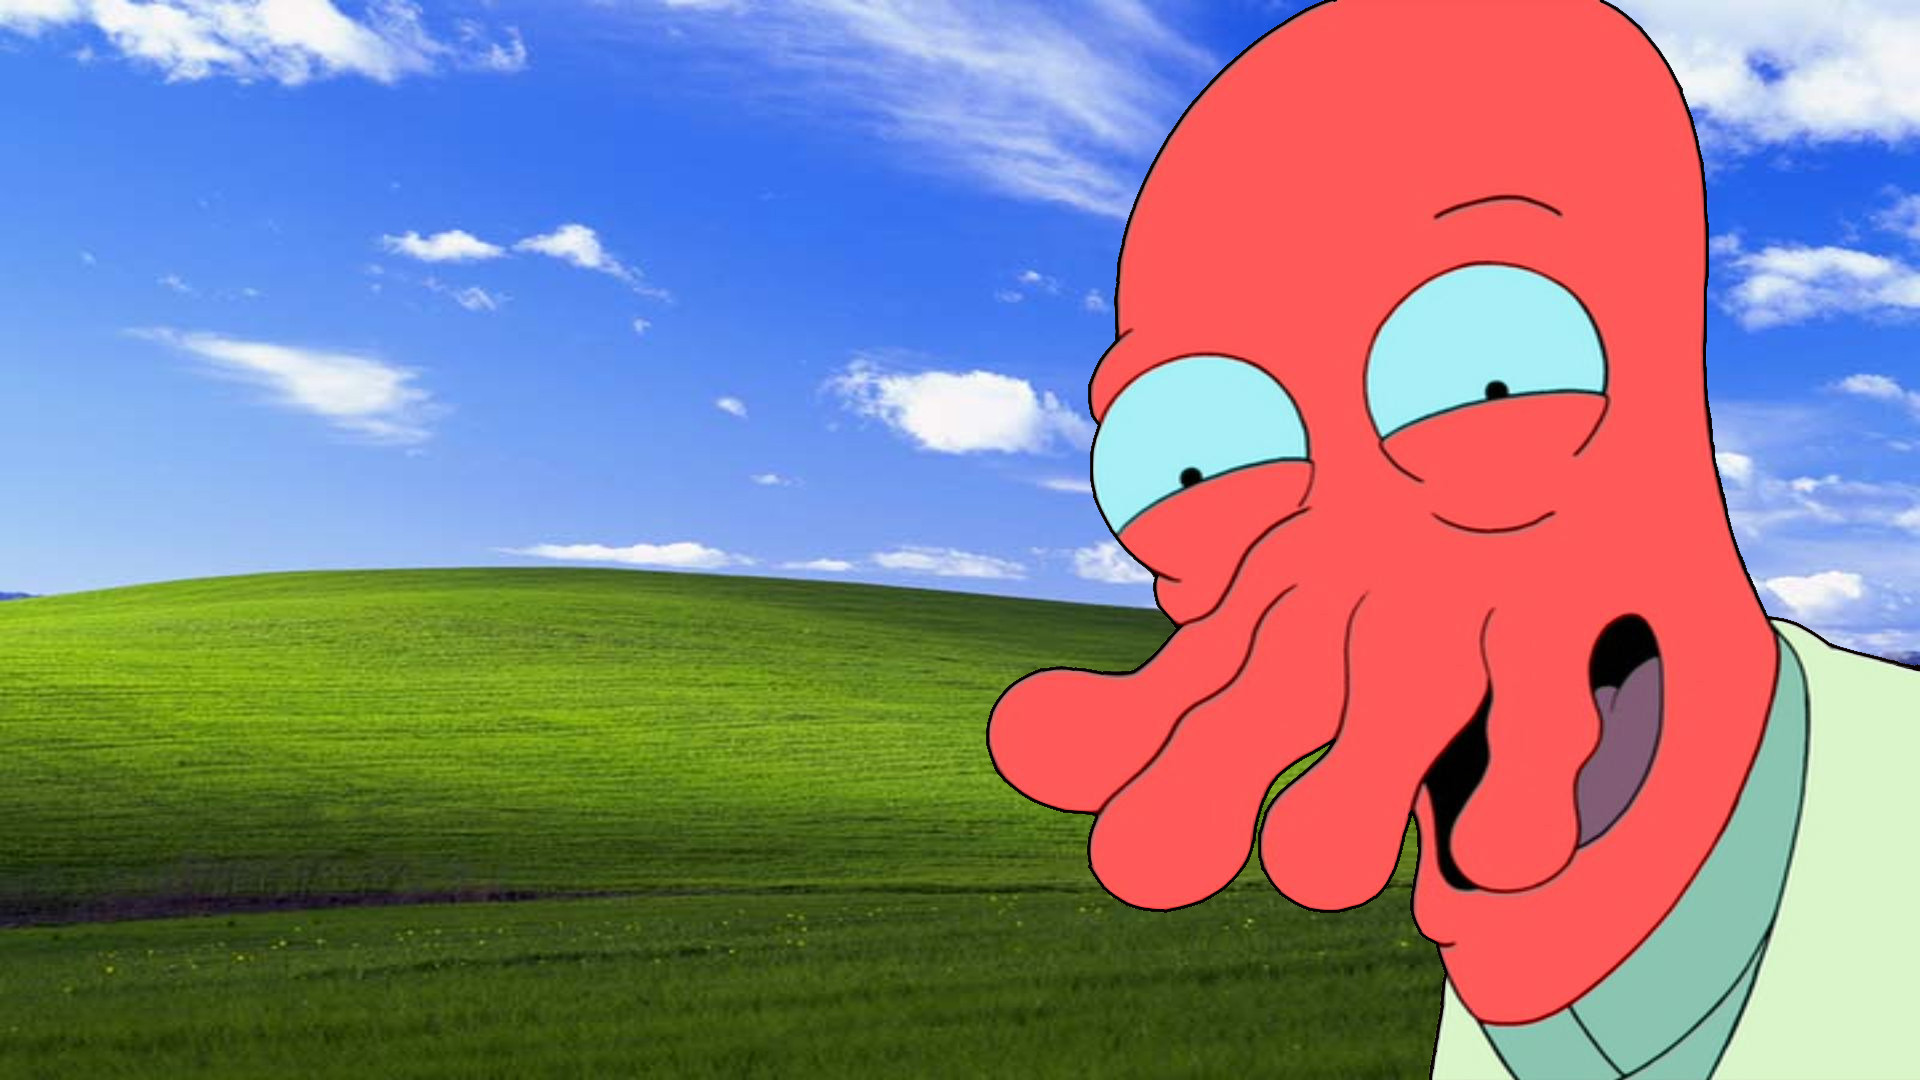 Need A New Wallpaper Why Not Zoidberg